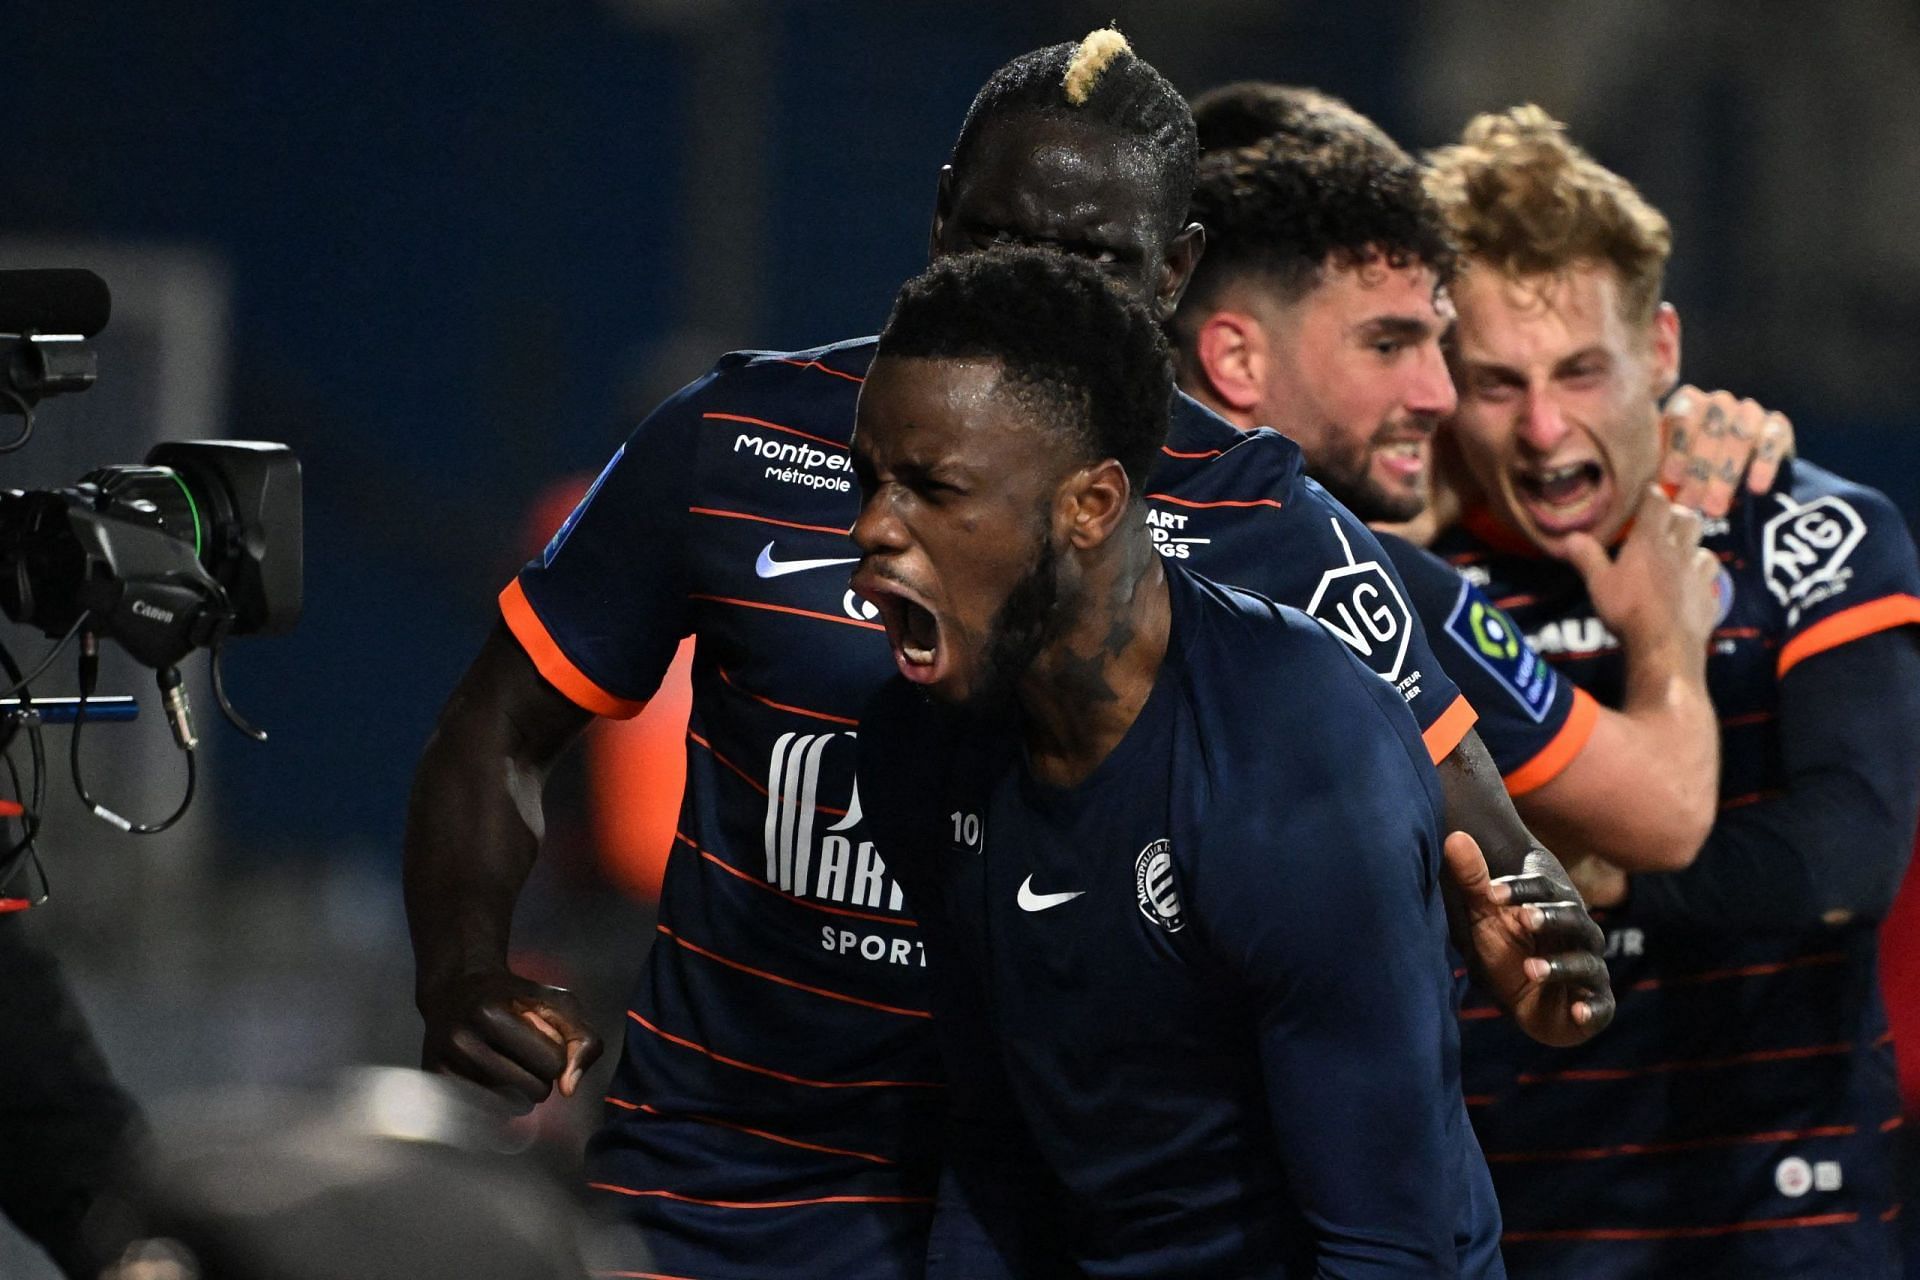 Can Montpellier pull off a win over Saint-Etienne this weekend?